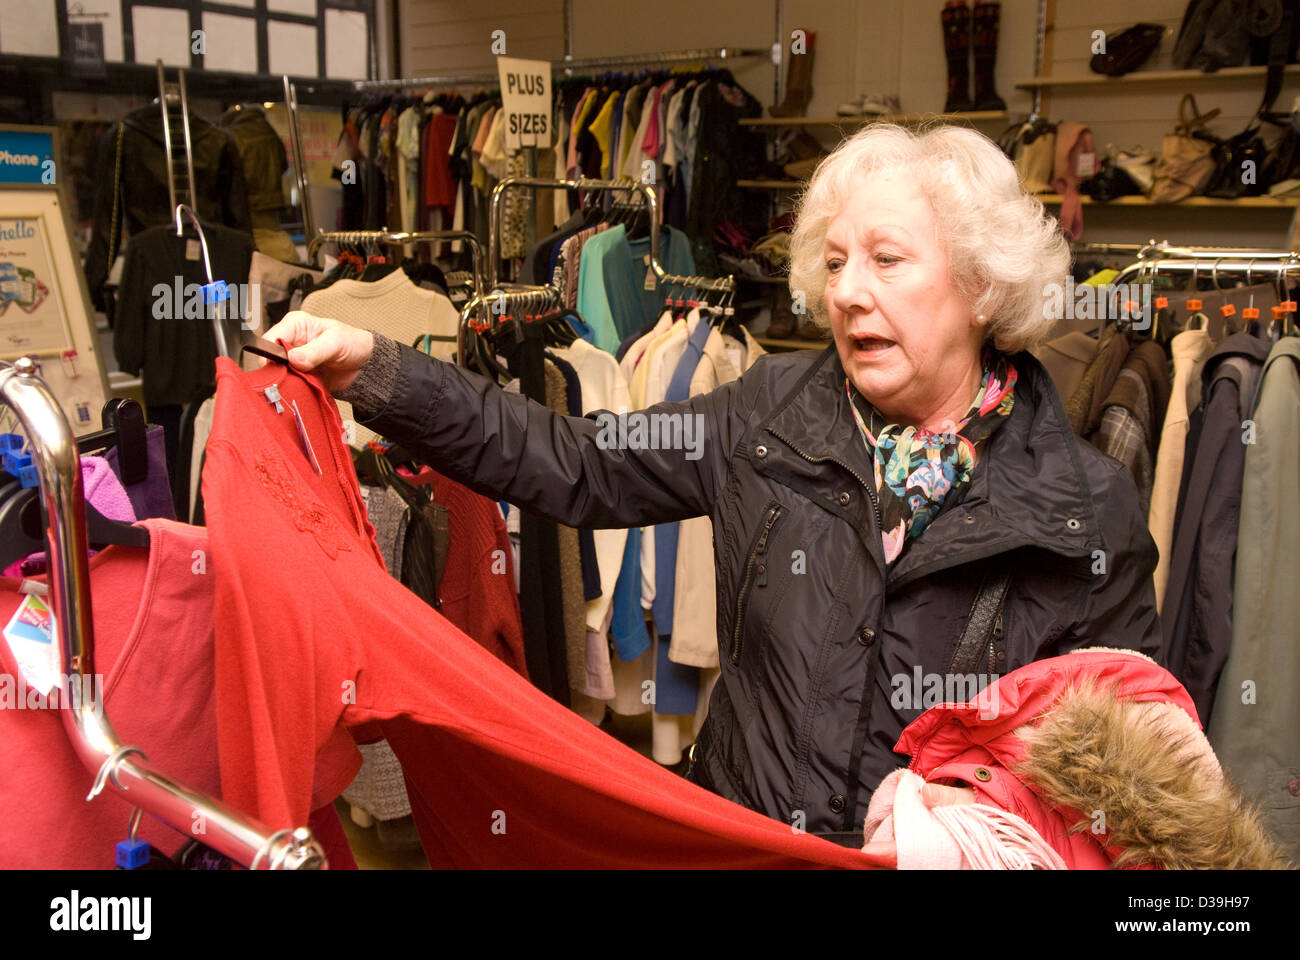 Elderly woman browsing clothing items on display in a charity shop, Godalming, Surrey, UK. Stock Photo